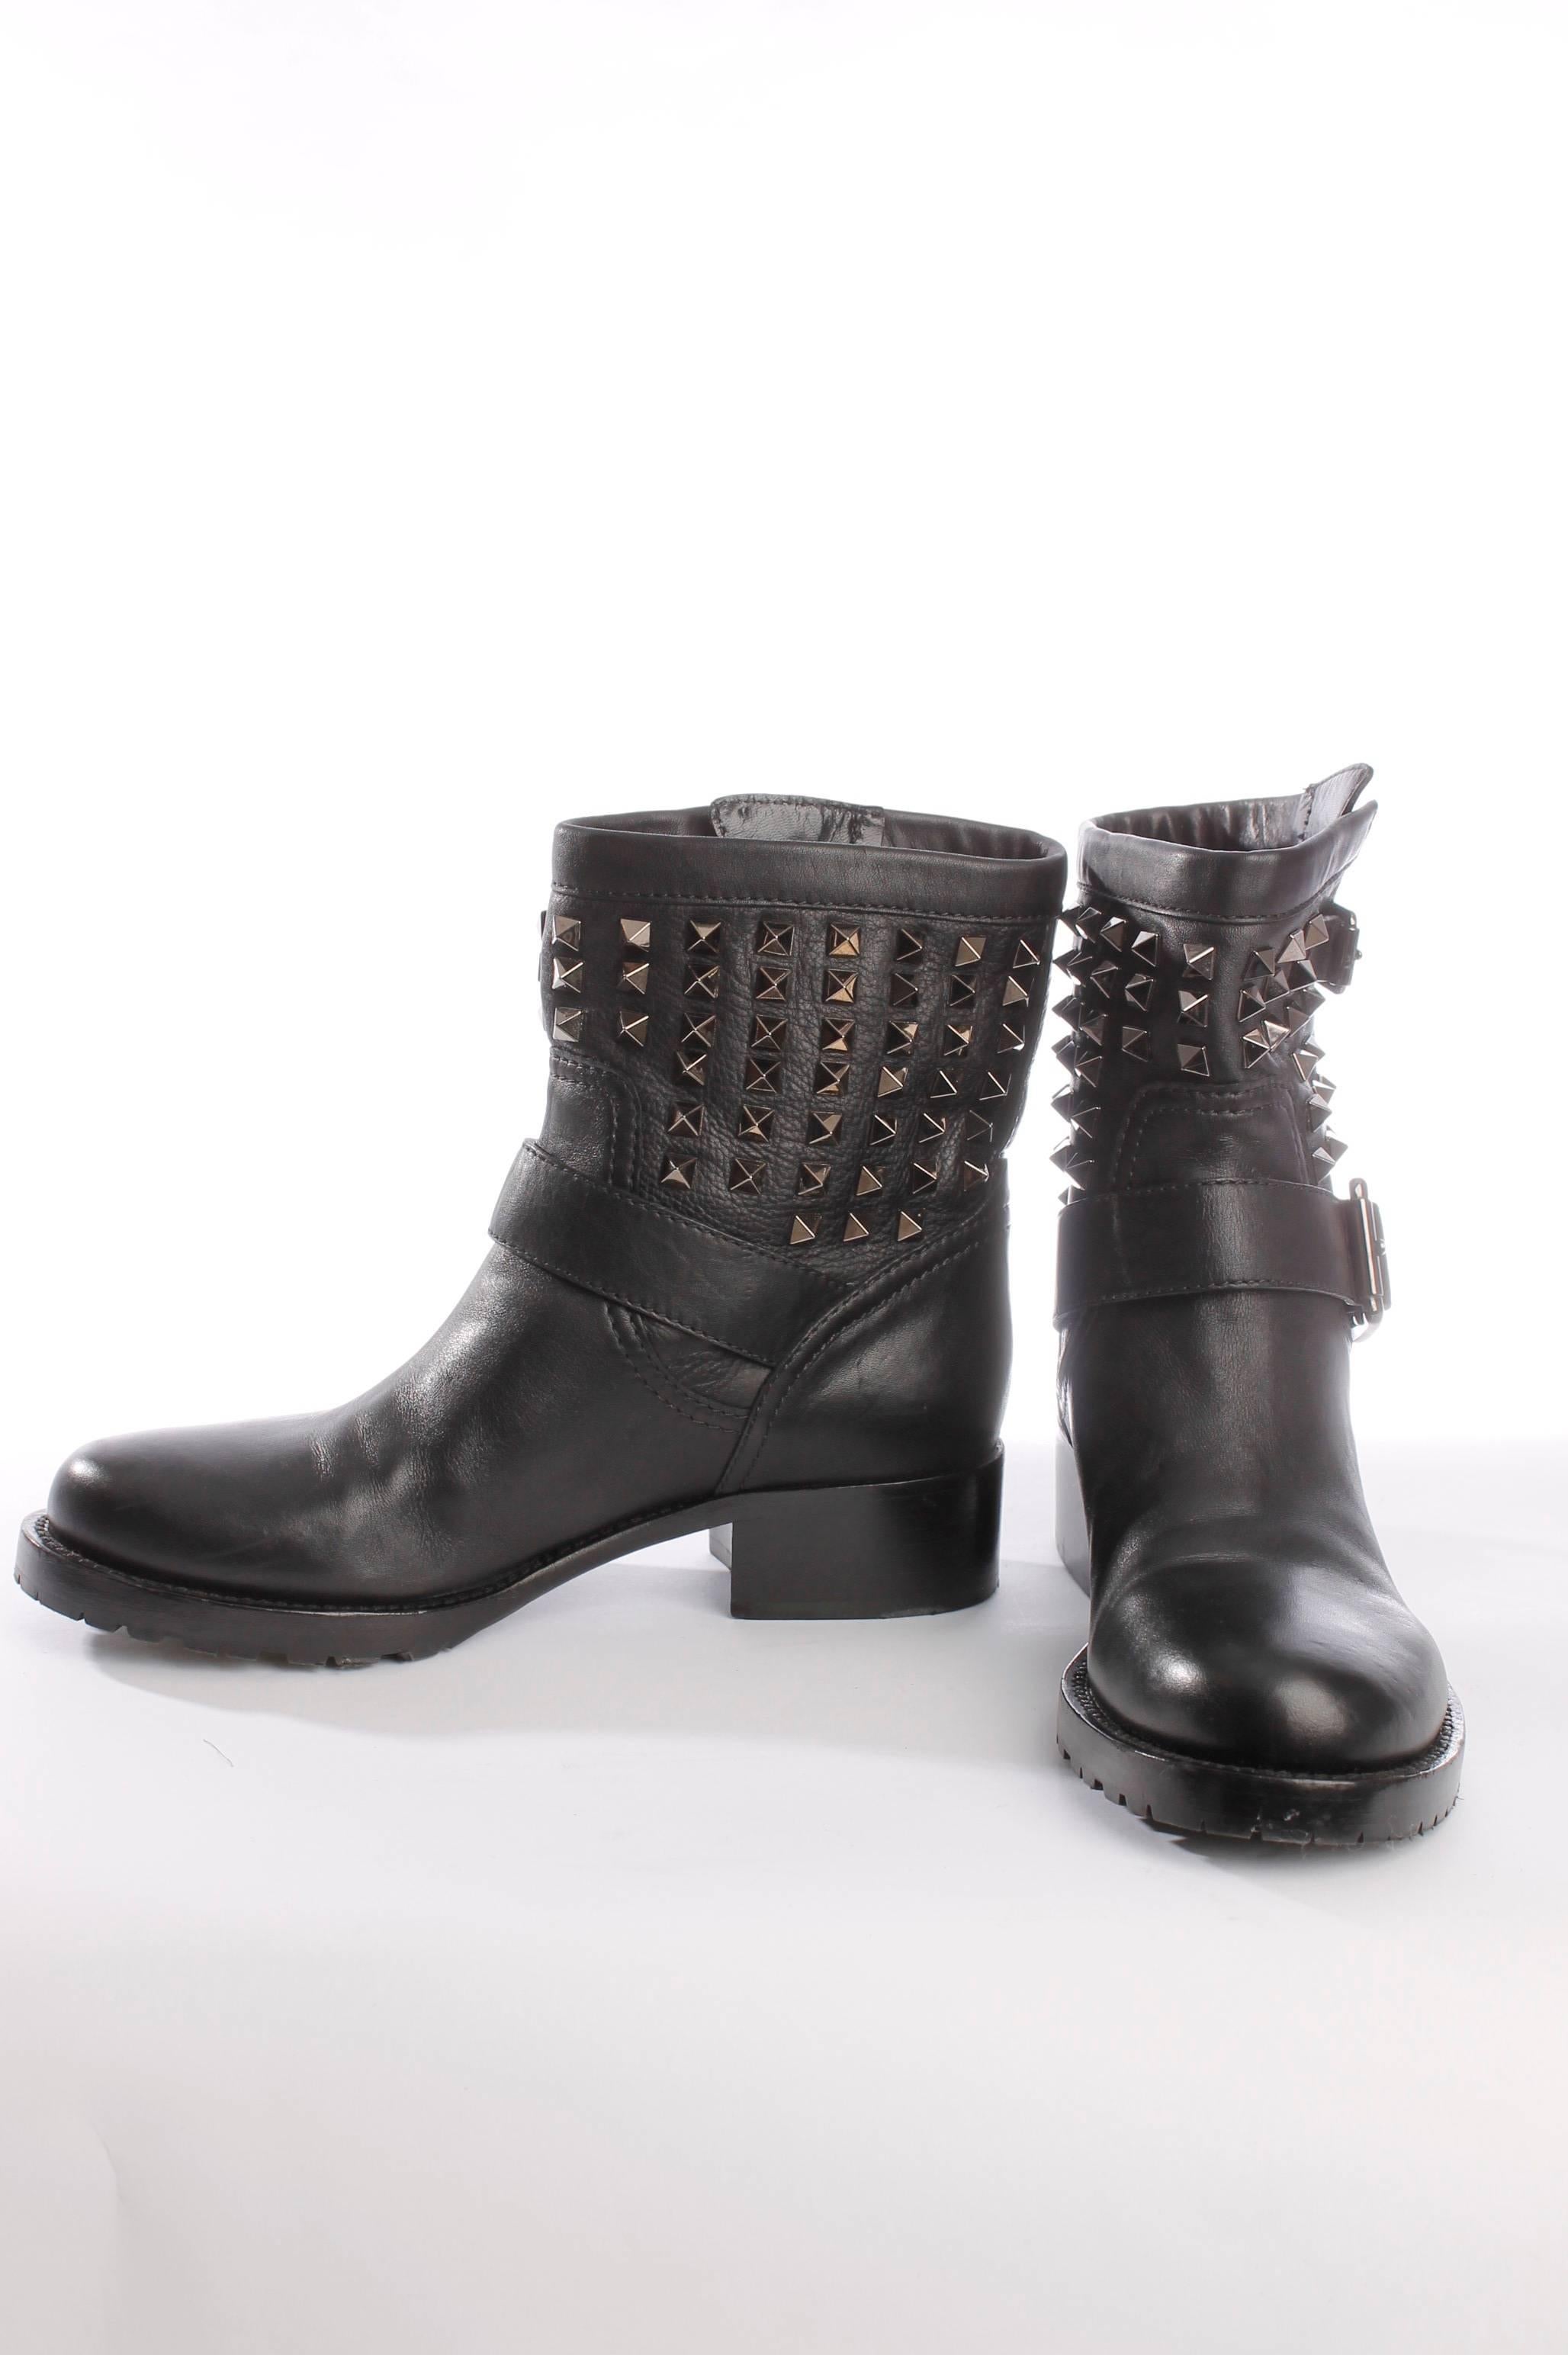 Like new! This super sought after Valentino biker boots are crazy! A short shaft filled with black/silver studs, a strap with buckle around the ankle and a small gespje at the top. Hot item! Valentino rocks!  Round toe and low heel of 3 centimeters.